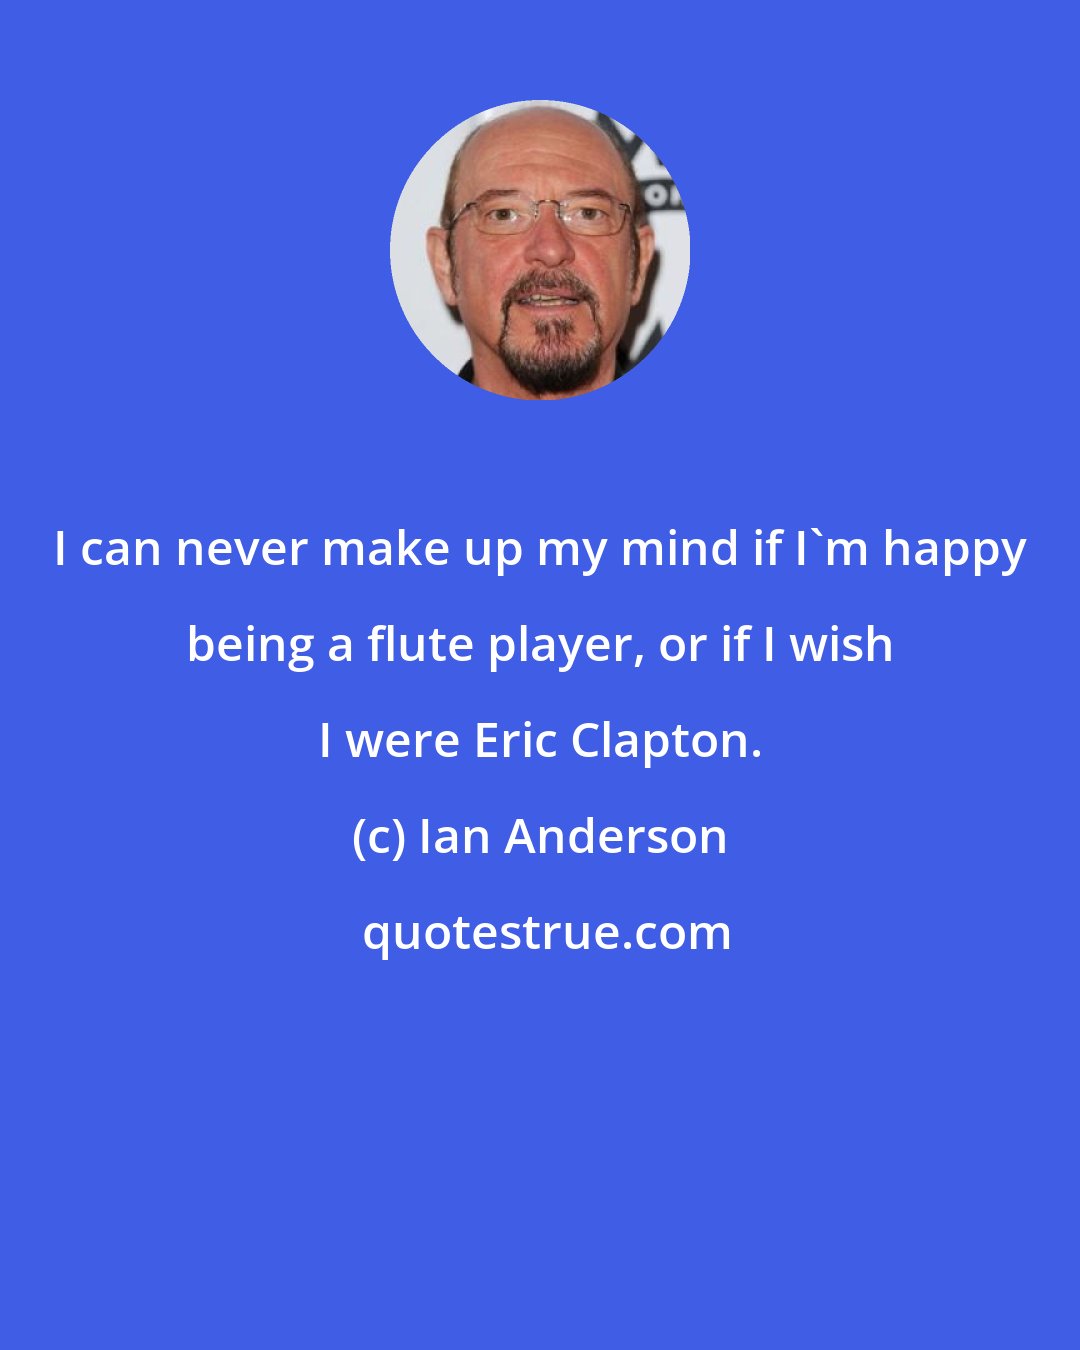 Ian Anderson: I can never make up my mind if I'm happy being a flute player, or if I wish I were Eric Clapton.